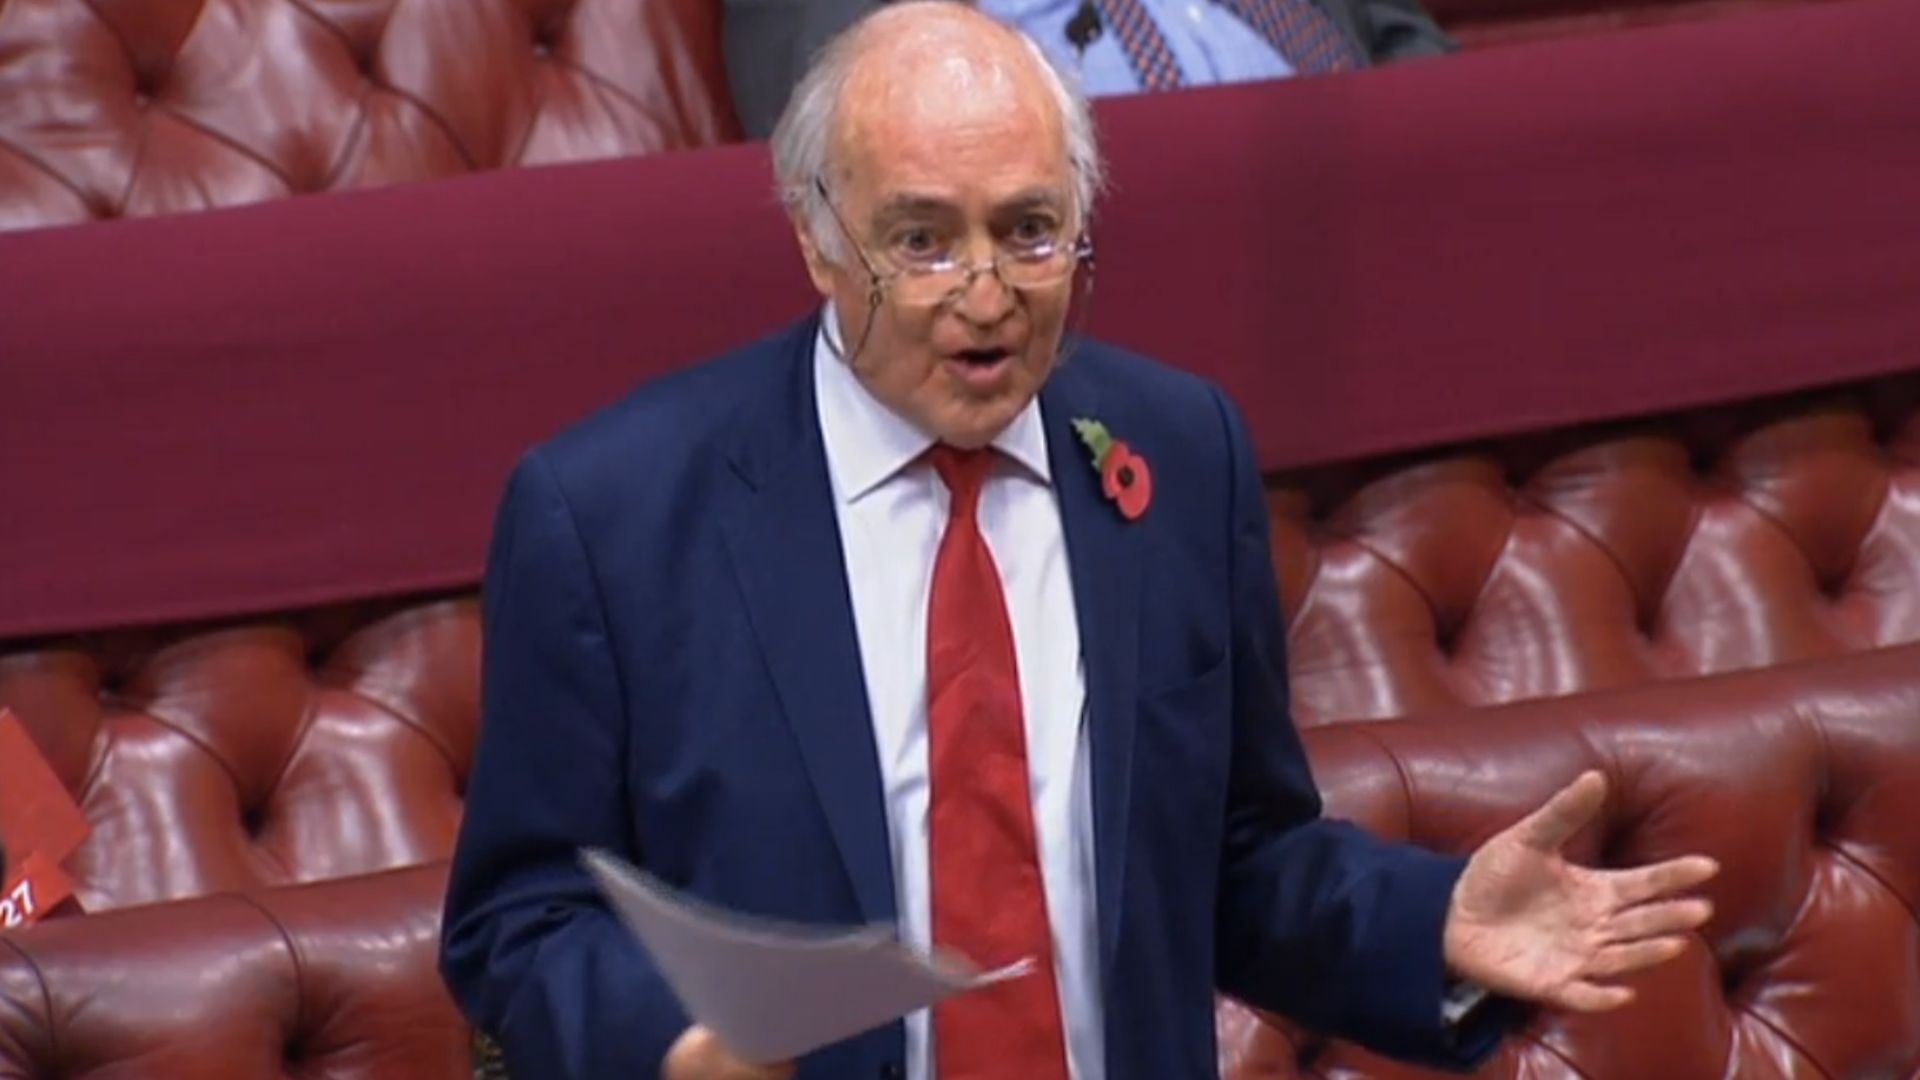 Michael Howard in the House of Lords - Credit: Parliament Live